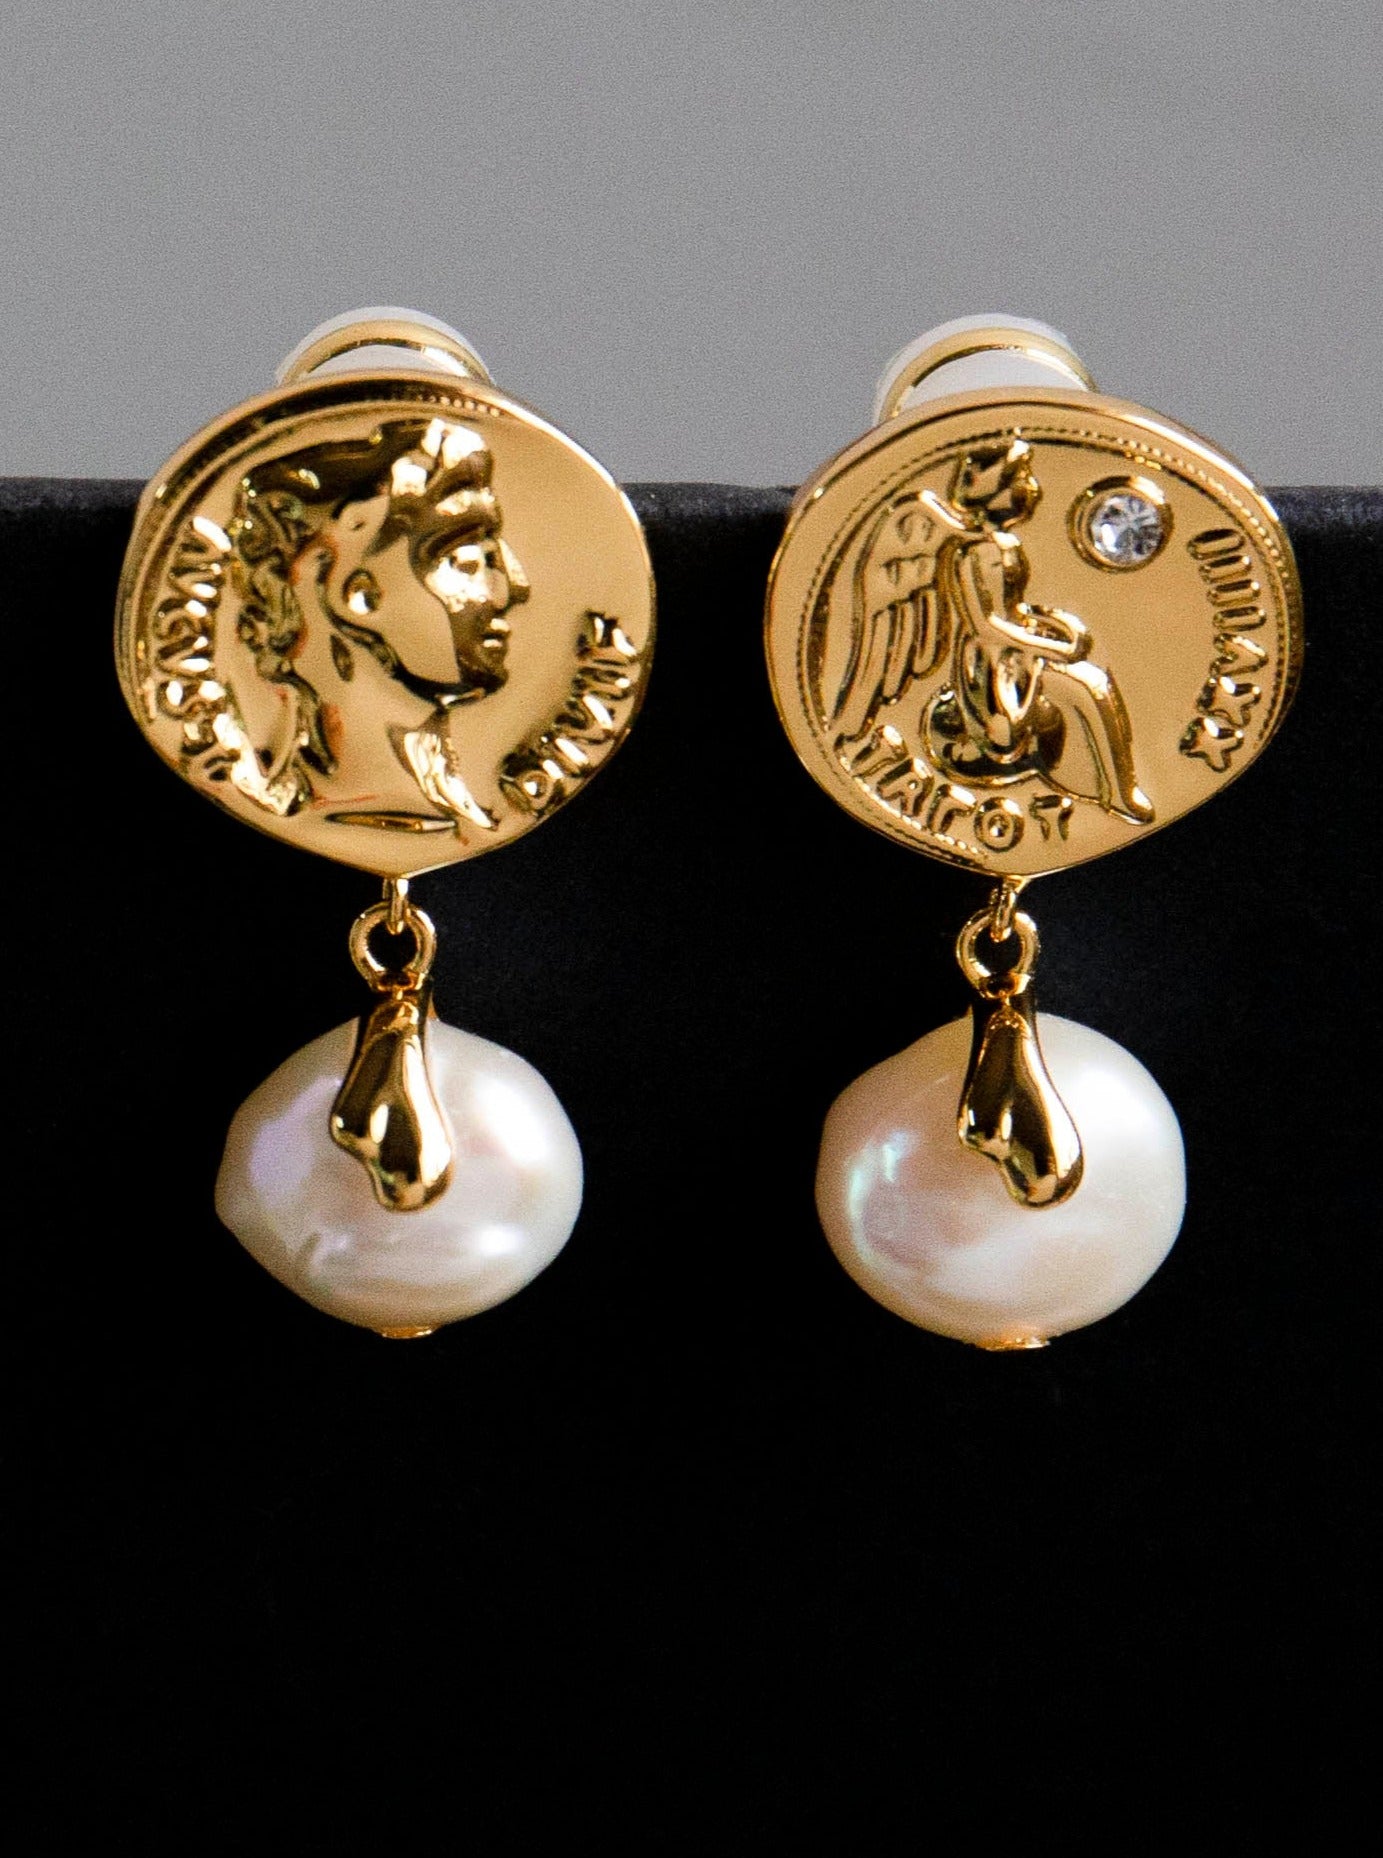 Ancient Coin and Pearl Stud Earrings